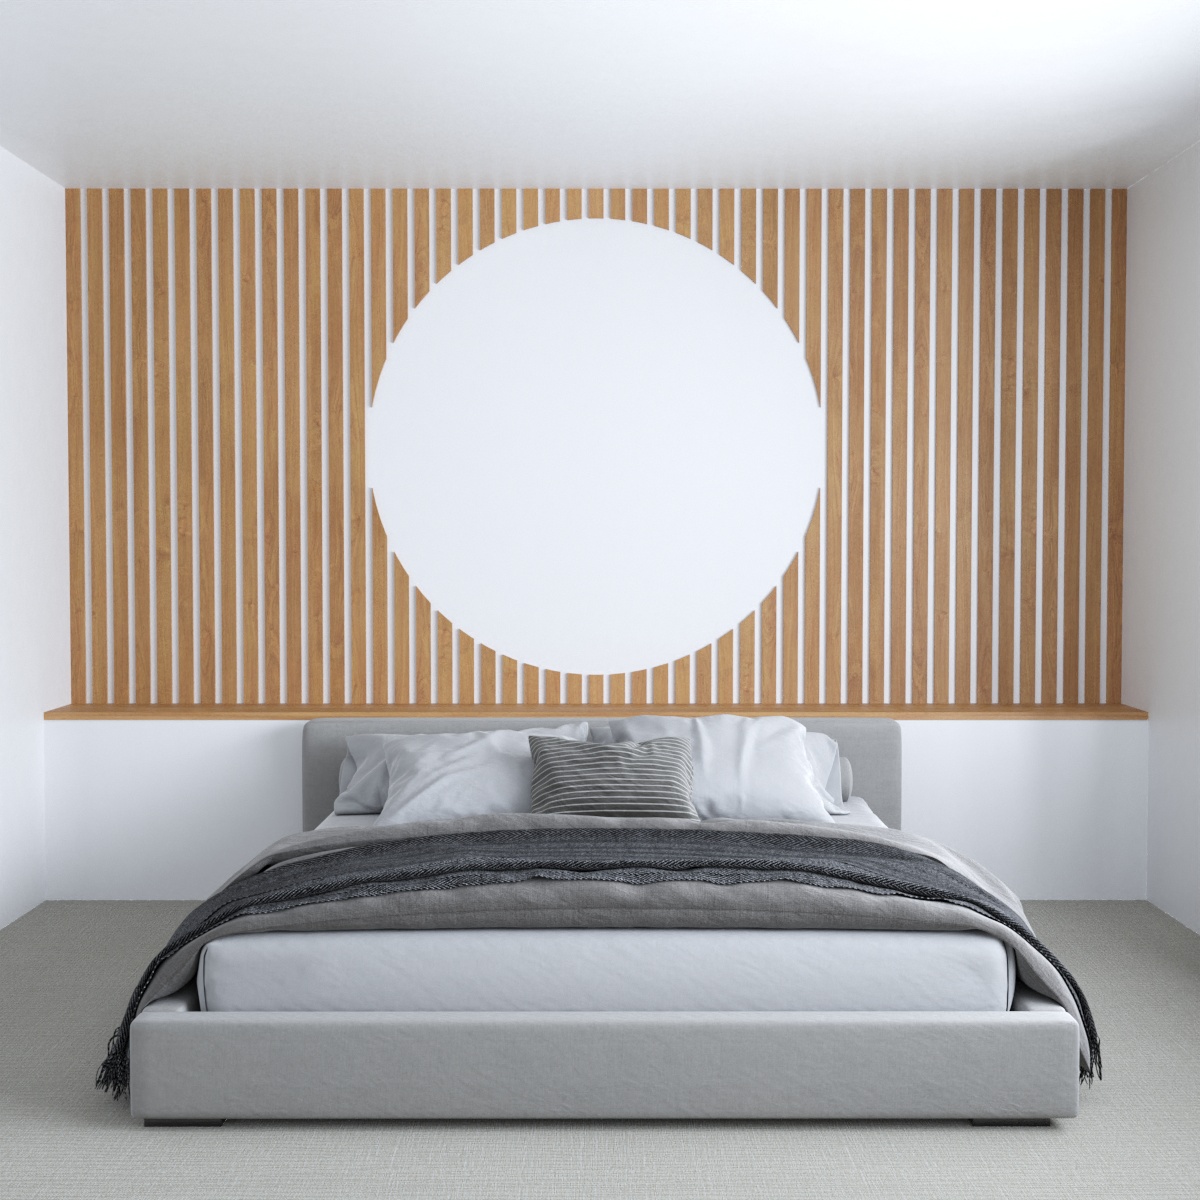 This wood accent wall design includes three variations that range from a single large round circle cut out of wood slats, to two half circles, and then a third design with 4 half circles.